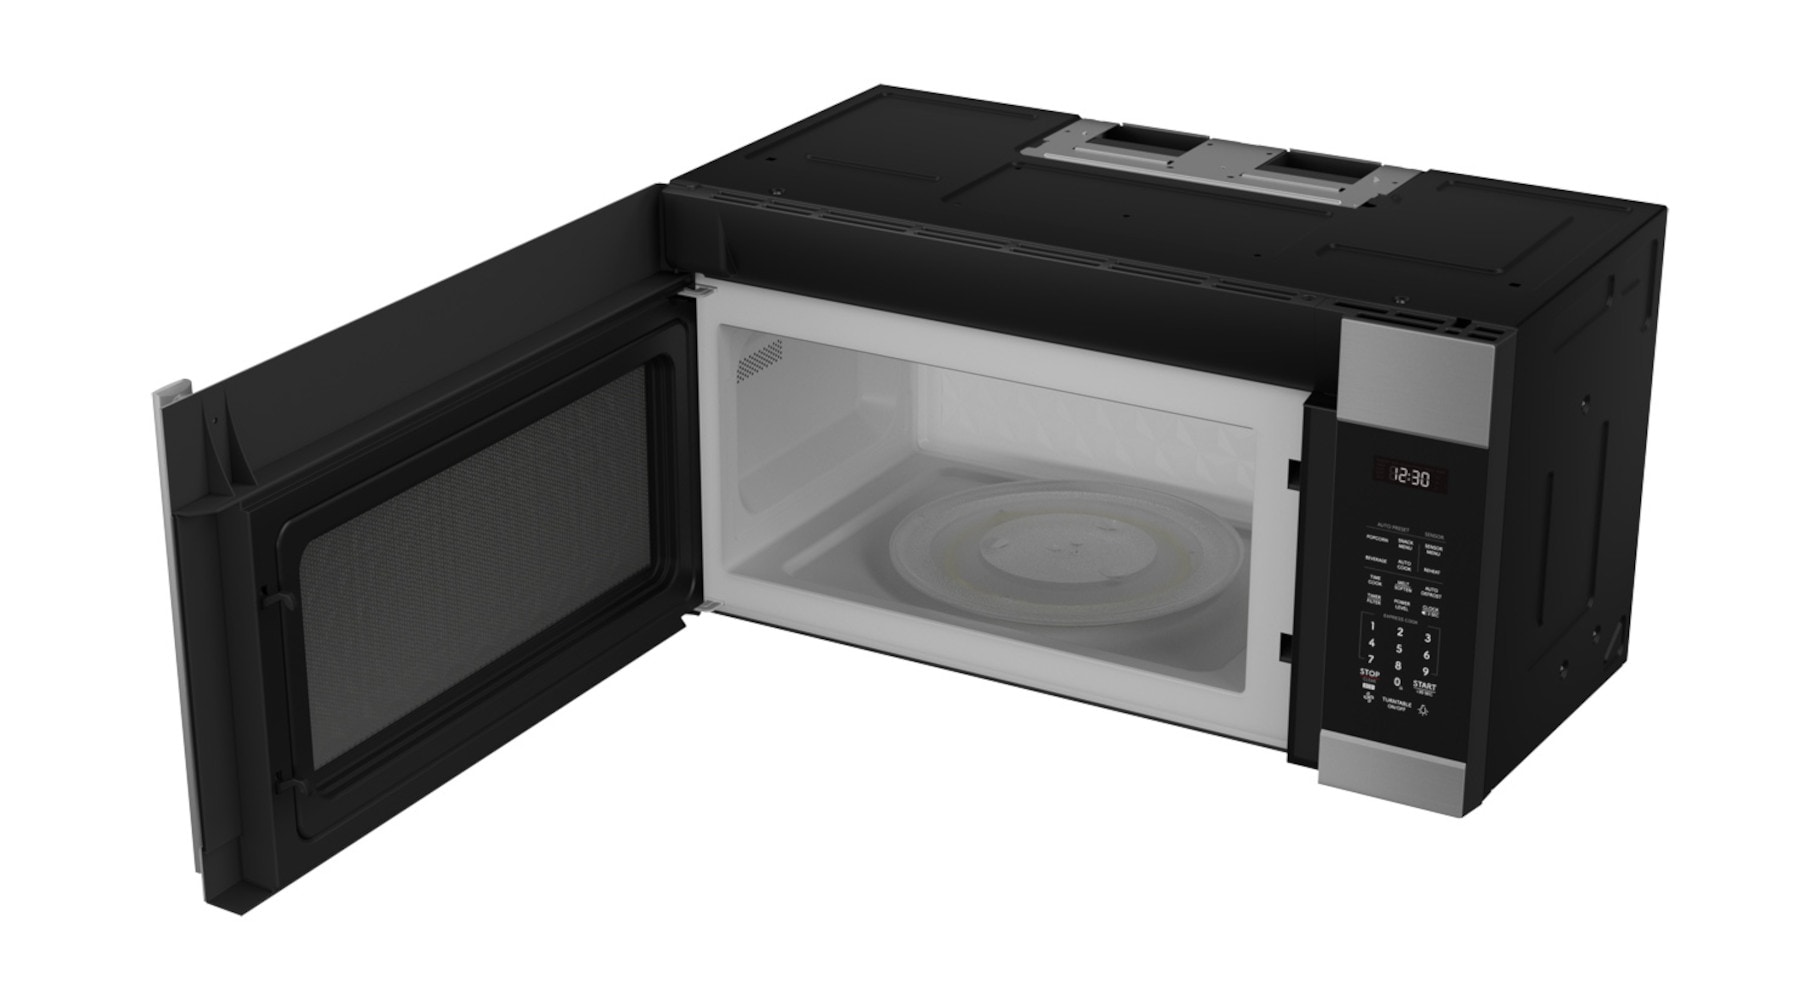 Sharp R55TS 0.5 cu. ft. Compact Microwave Oven with 650 Cooking